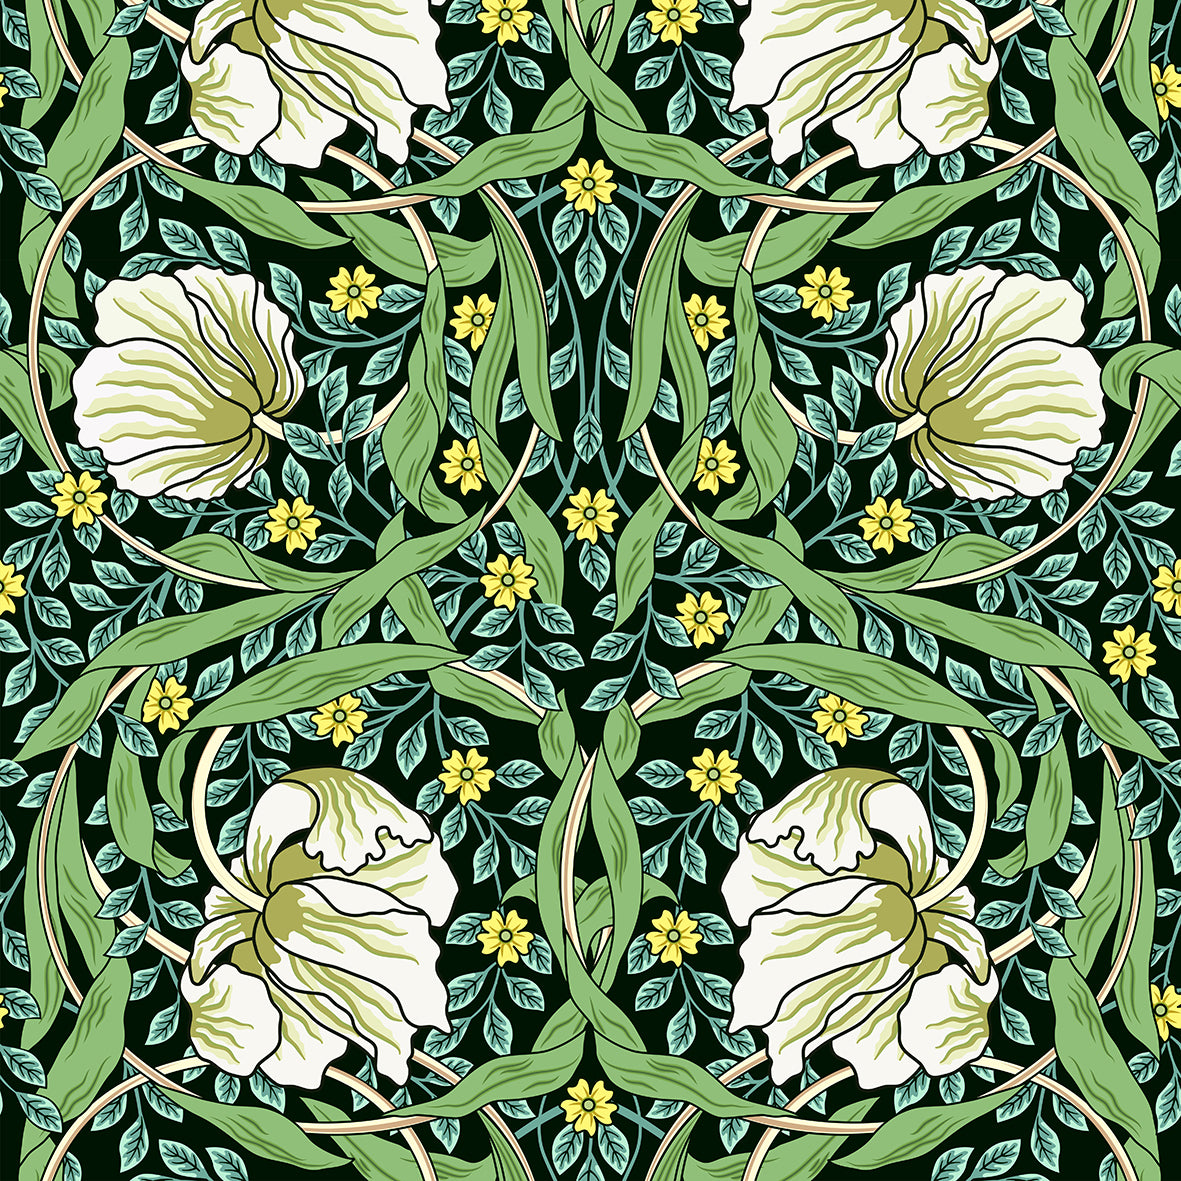 william-morris-co-area-rugs-pimpernel-collection-green-2